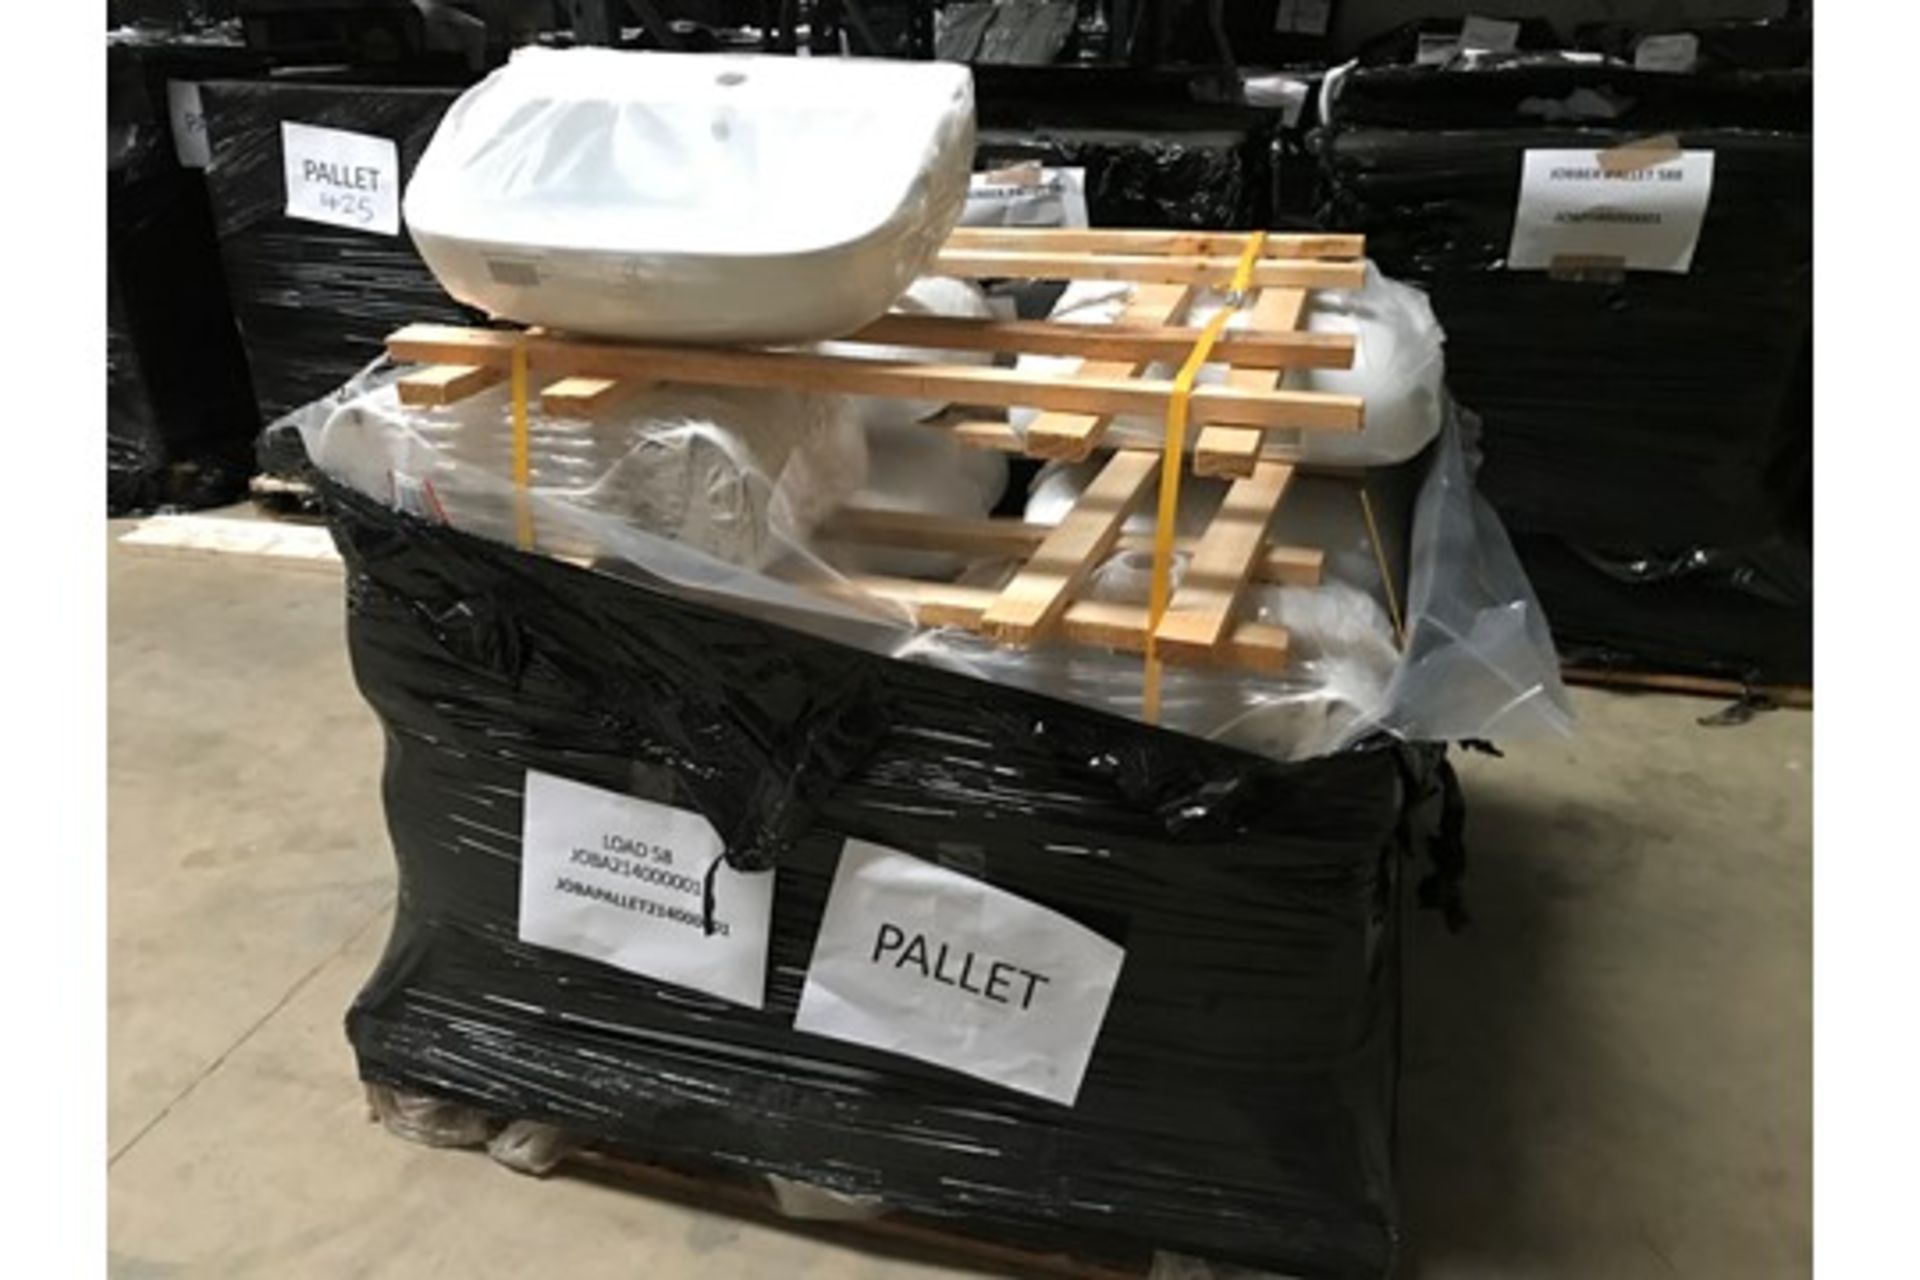 Pallet 217 - 16 x Phase Short Projection Basin - Image 3 of 3